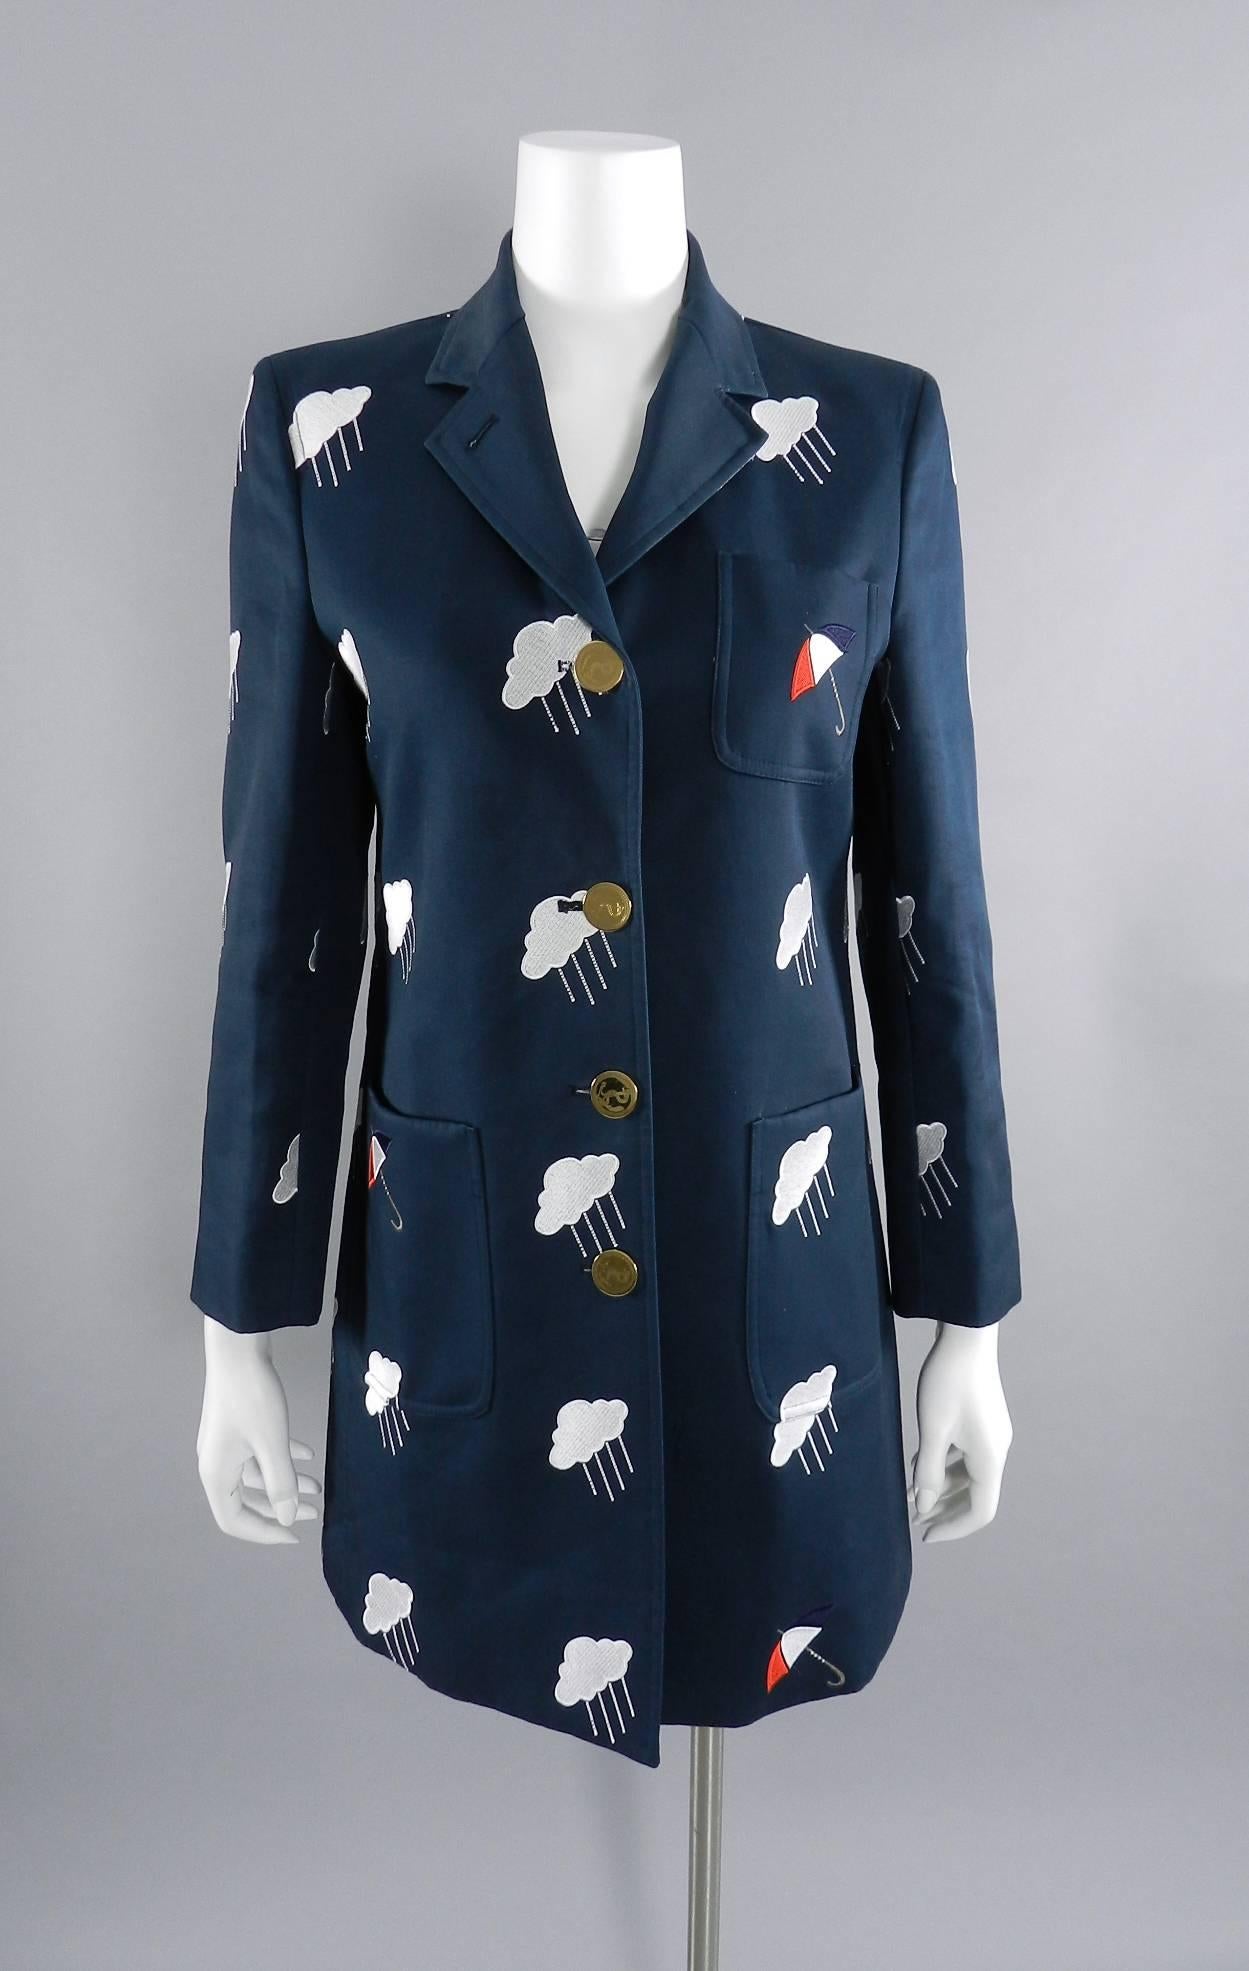 Thom Browne Navy Embroidered Coat with Umbrellas and Clouds 4